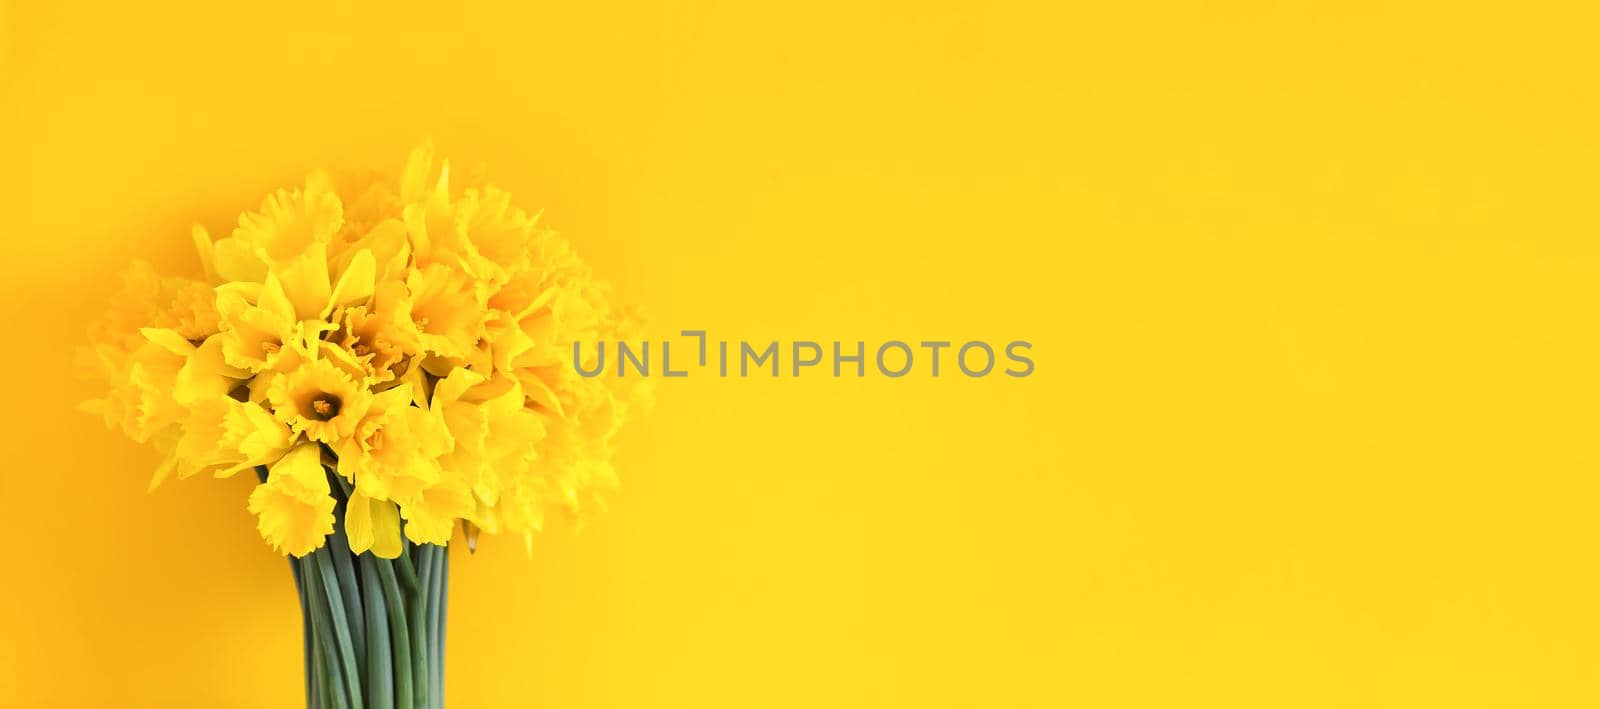 Beautiful bouquet of spring yellow narcisus flowers or daffodil plants on bright yellow background. by nightlyviolet